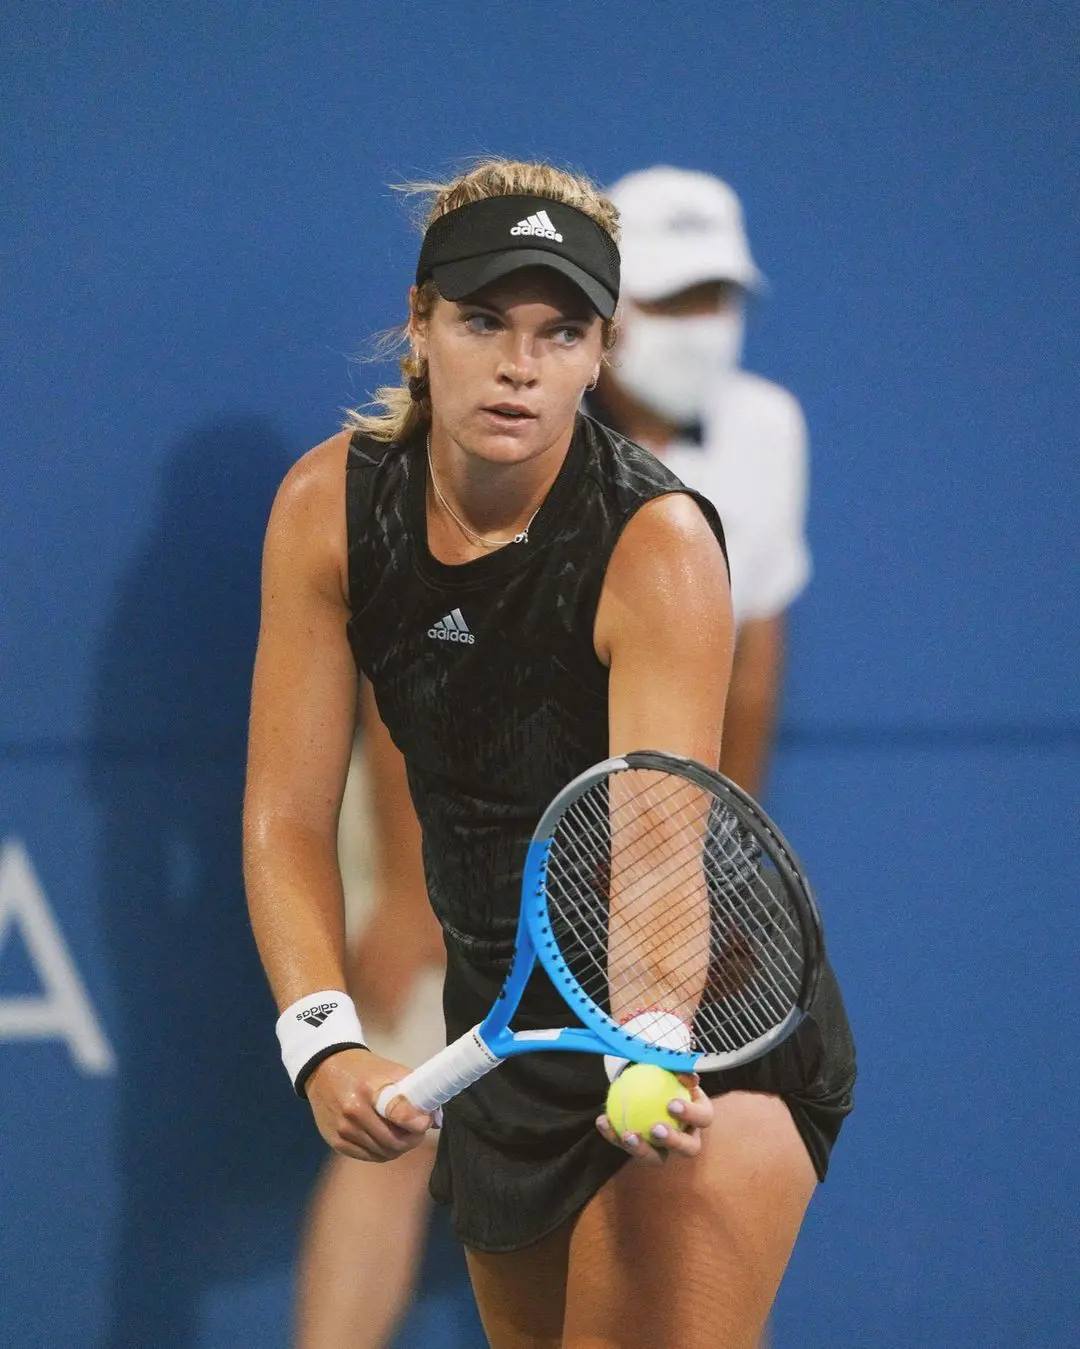 U.S. Open 2021's finalist, Caty McNally mainly wears Adidas gear during her matches.